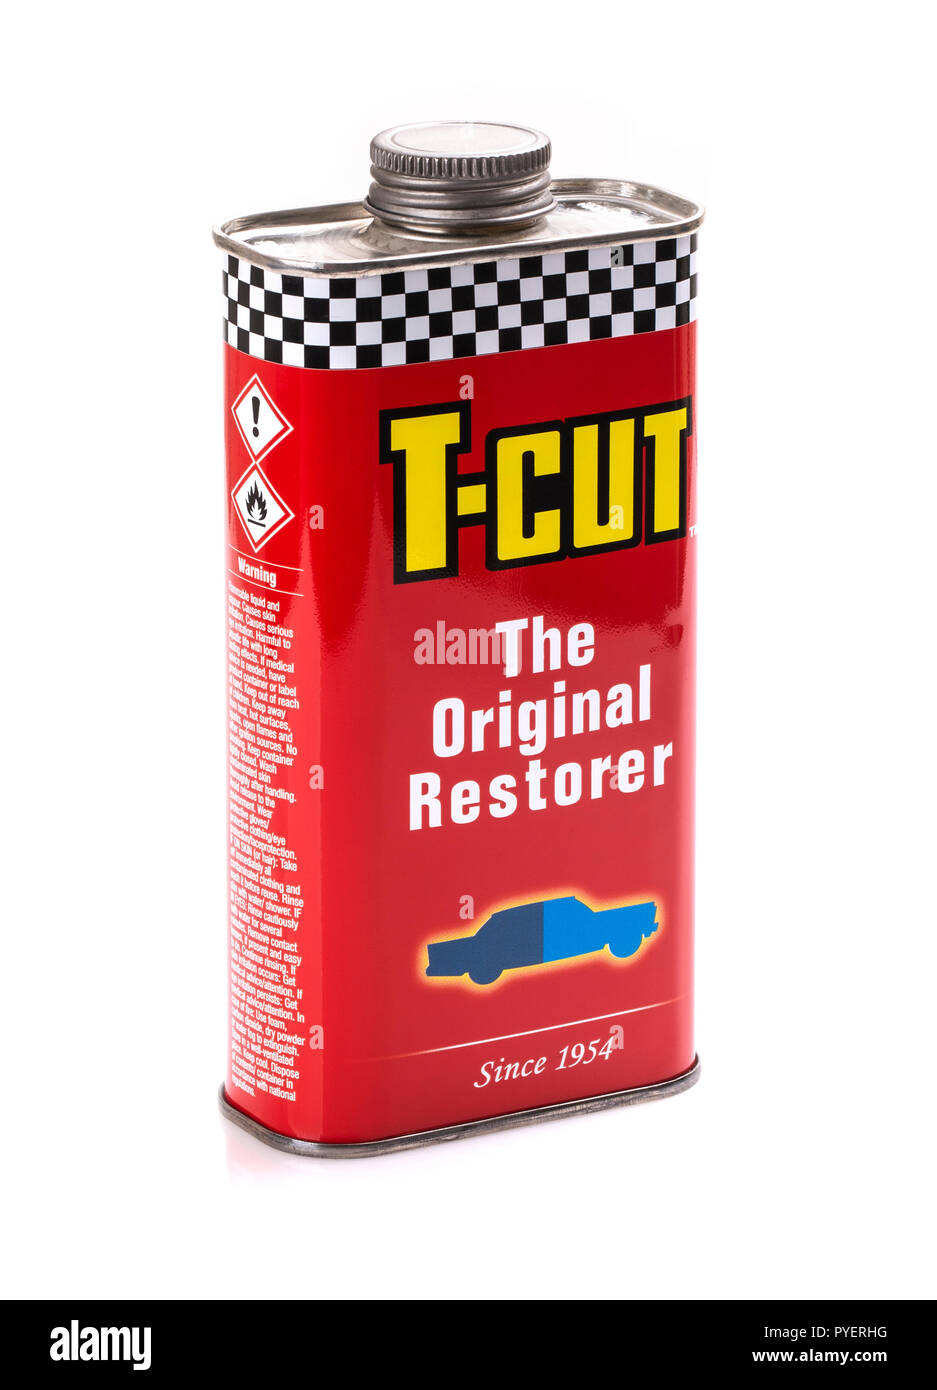 SWINDON, UK - OCTOBER 14, 2018: Can of T-Cut the original paint restorer on a white background. Stock Photo